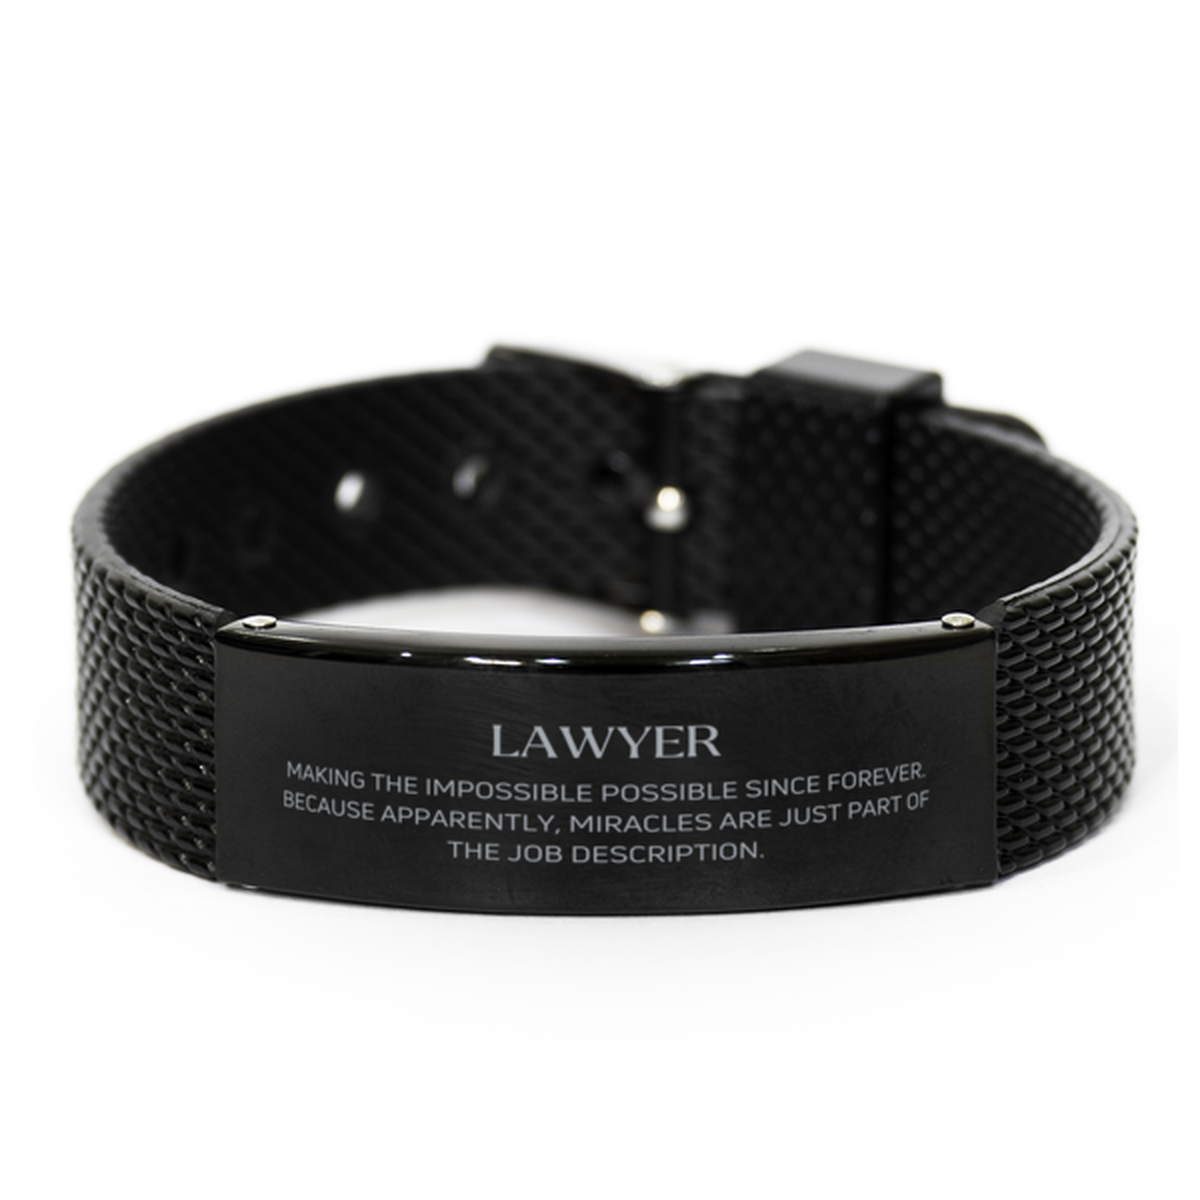 Funny Lawyer Gifts, Miracles are just part of the job description, Inspirational Birthday Black Shark Mesh Bracelet For Lawyer, Men, Women, Coworkers, Friends, Boss